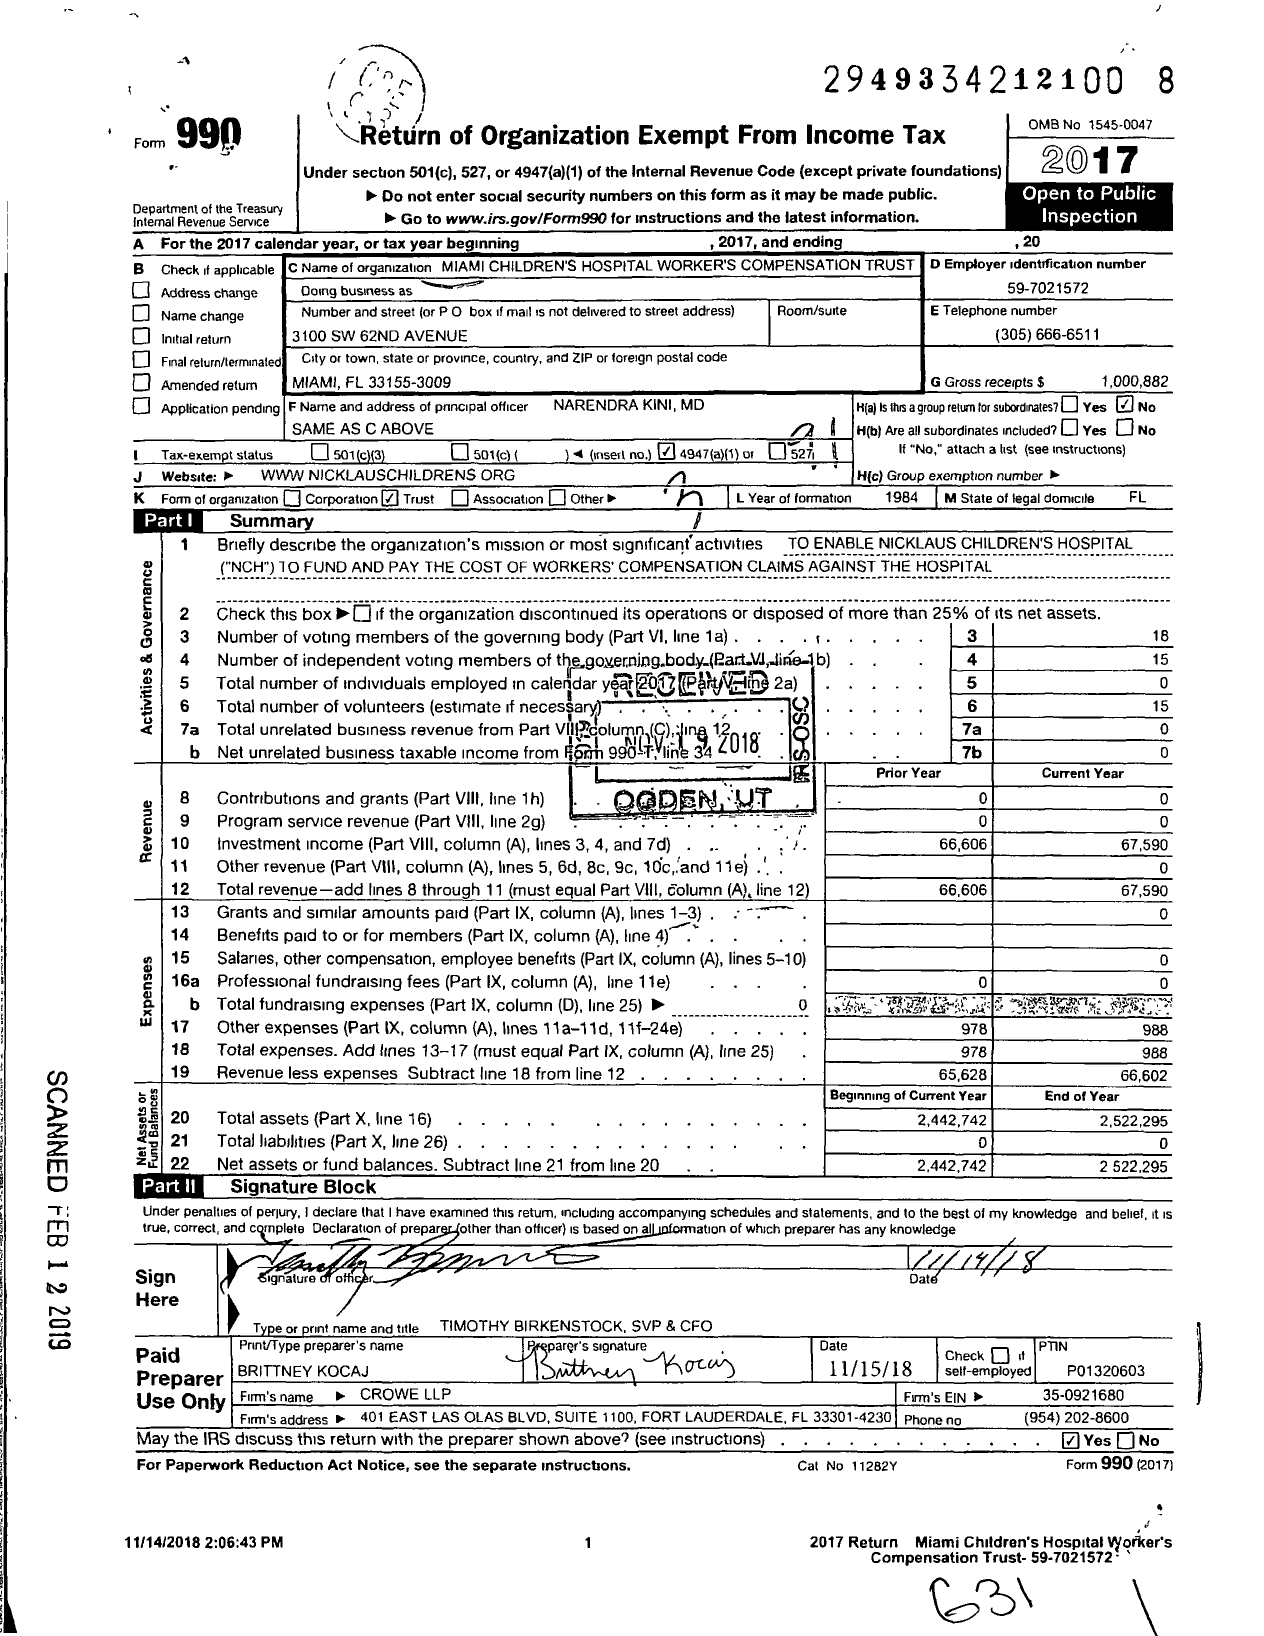 Image of first page of 2017 Form 990O for Miami Children's Hospital Worker's Compensation Trust